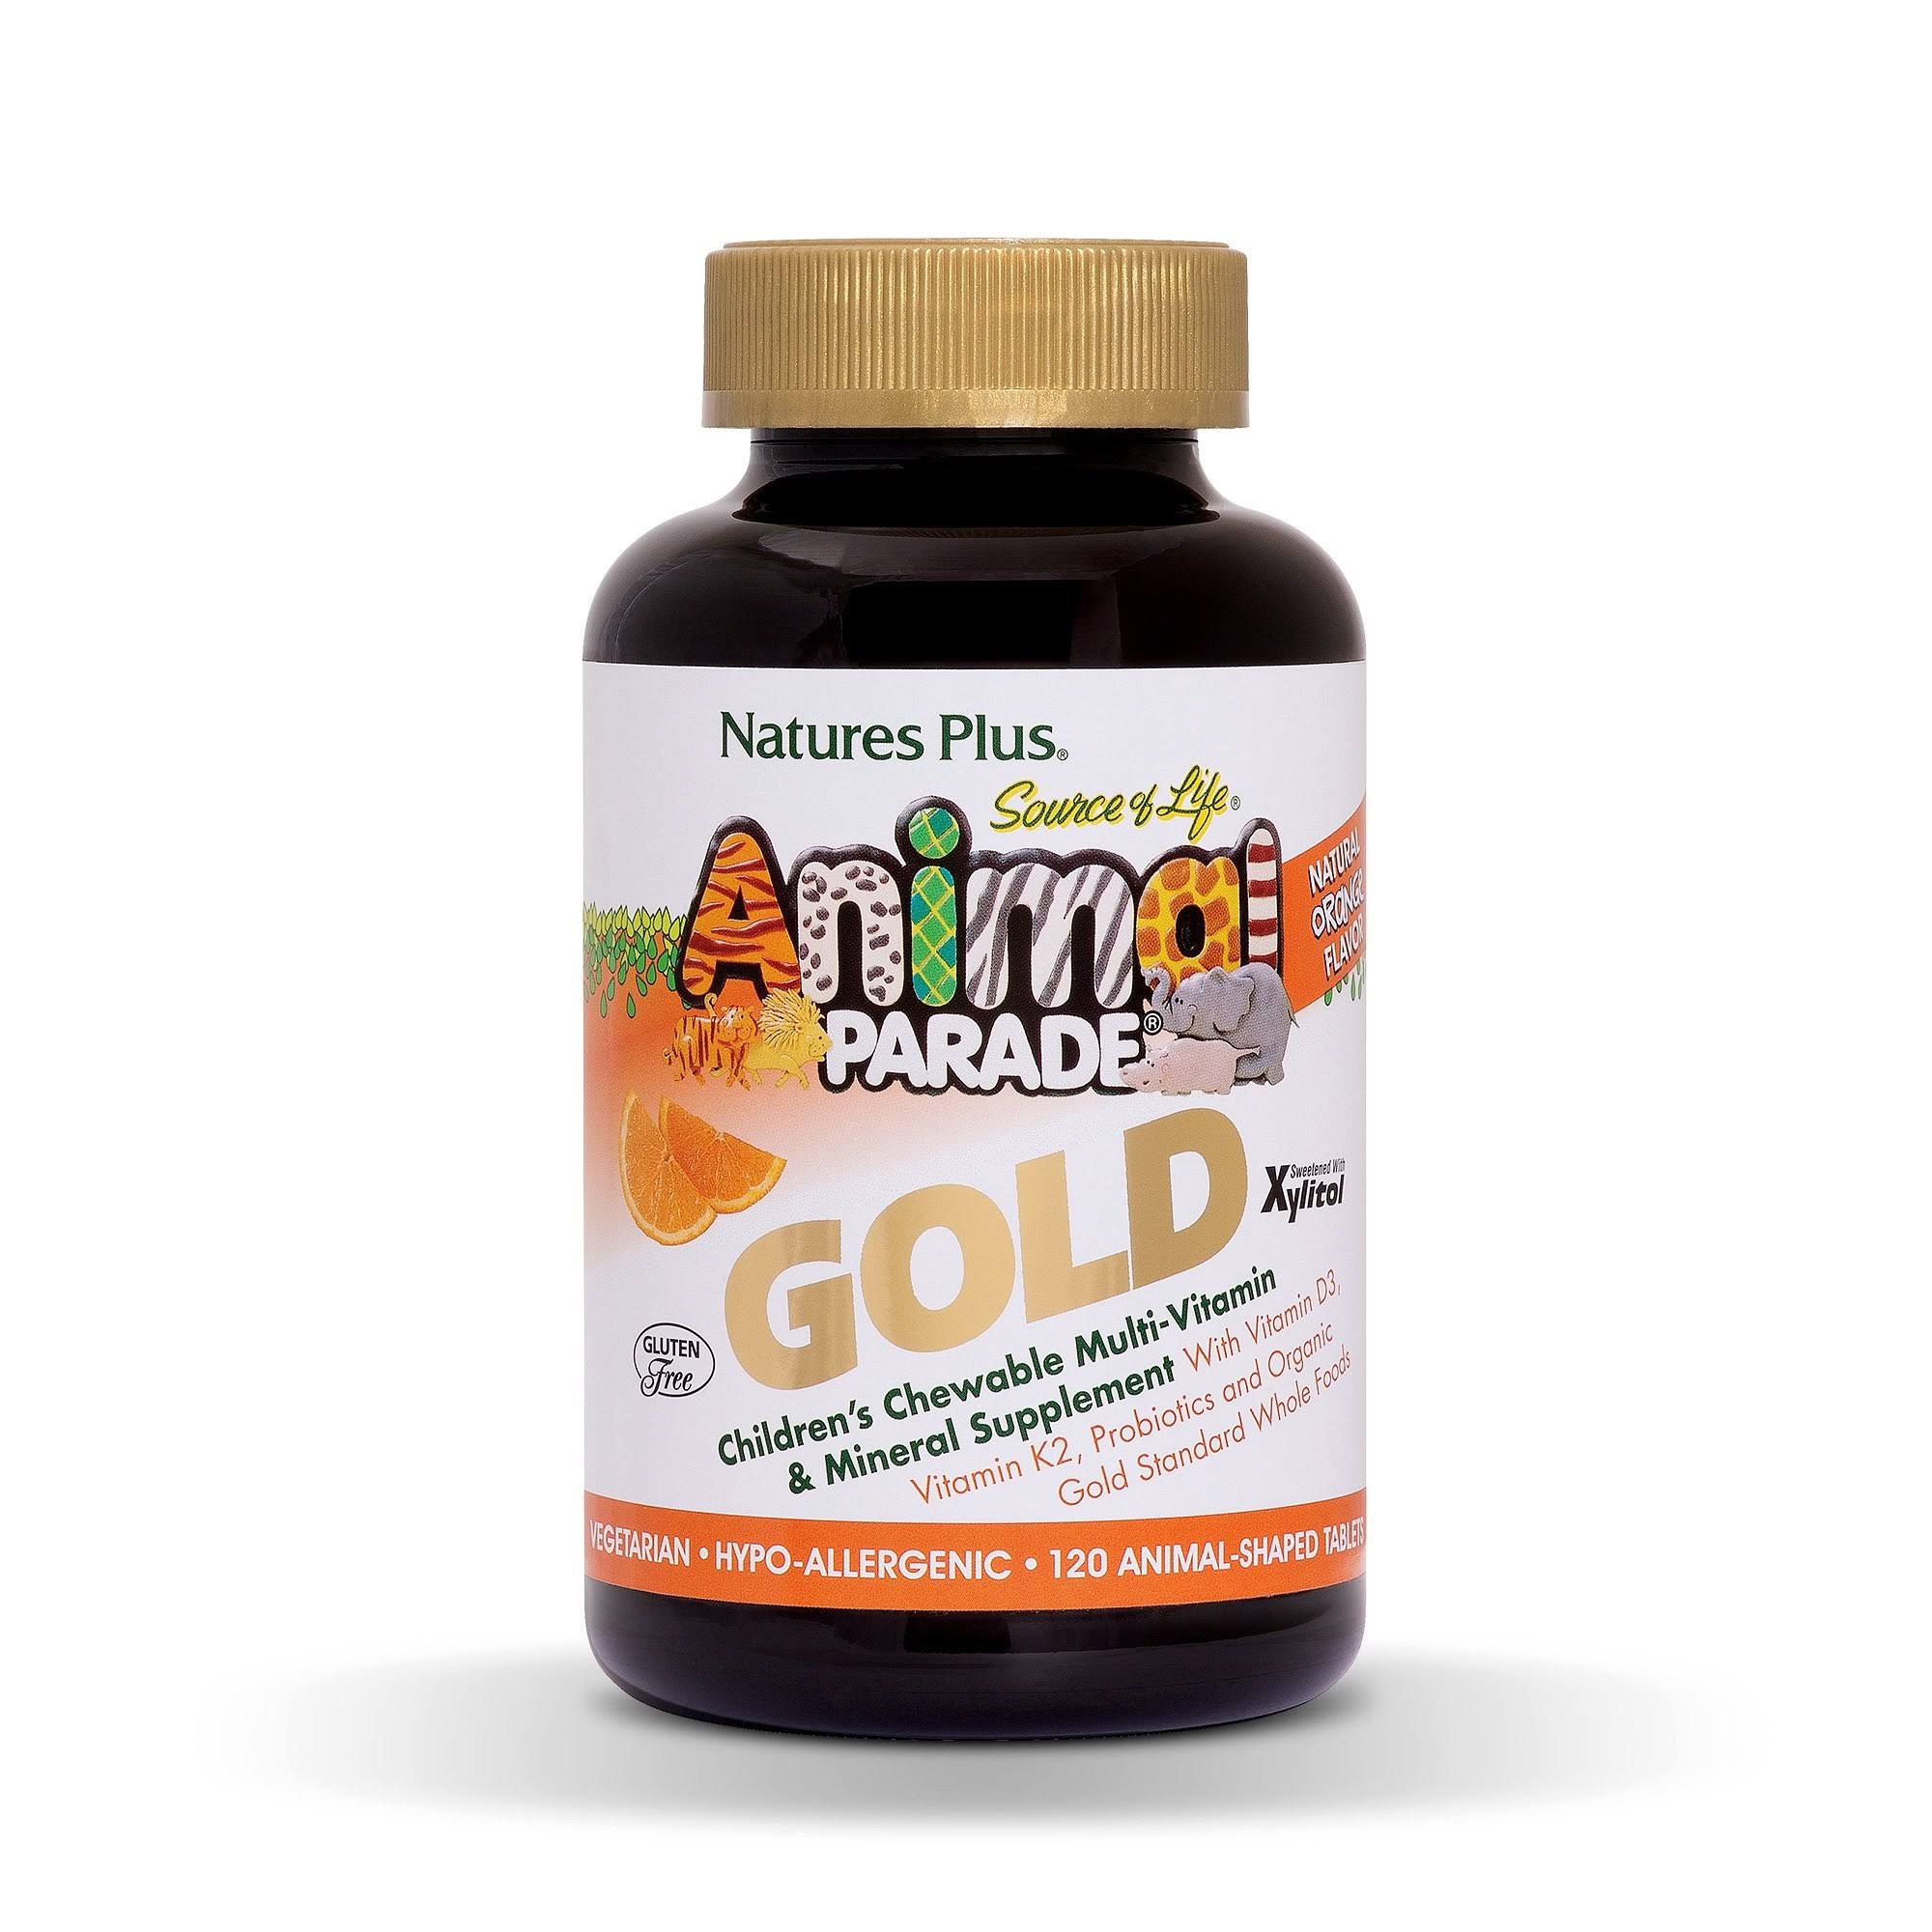 Nature's Plus, Source of Life, Animal Parade Gold, Children's Chewable Multi-Vitamin & Mineral Supplement, Natural Orange, 120 Animal-Shaped Tablets